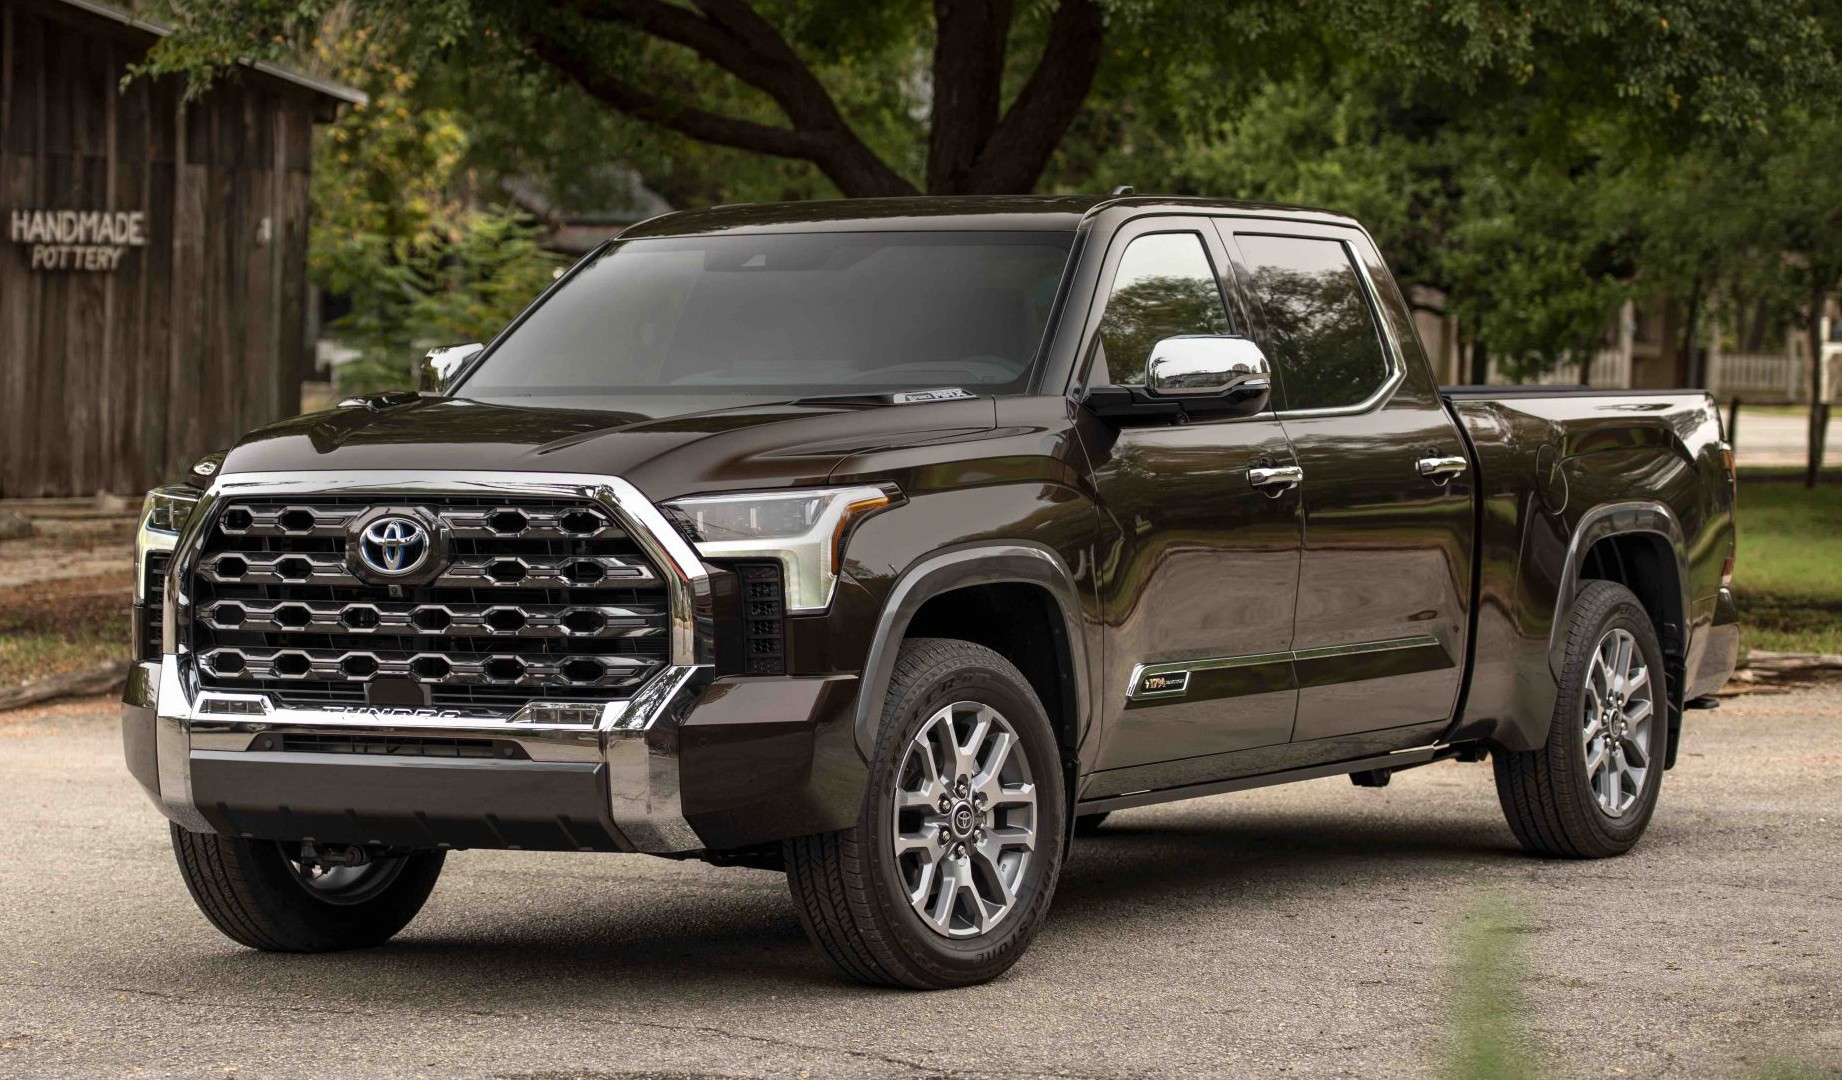 2023 Pickup Trucks With Best Resale Value - The Engine Block